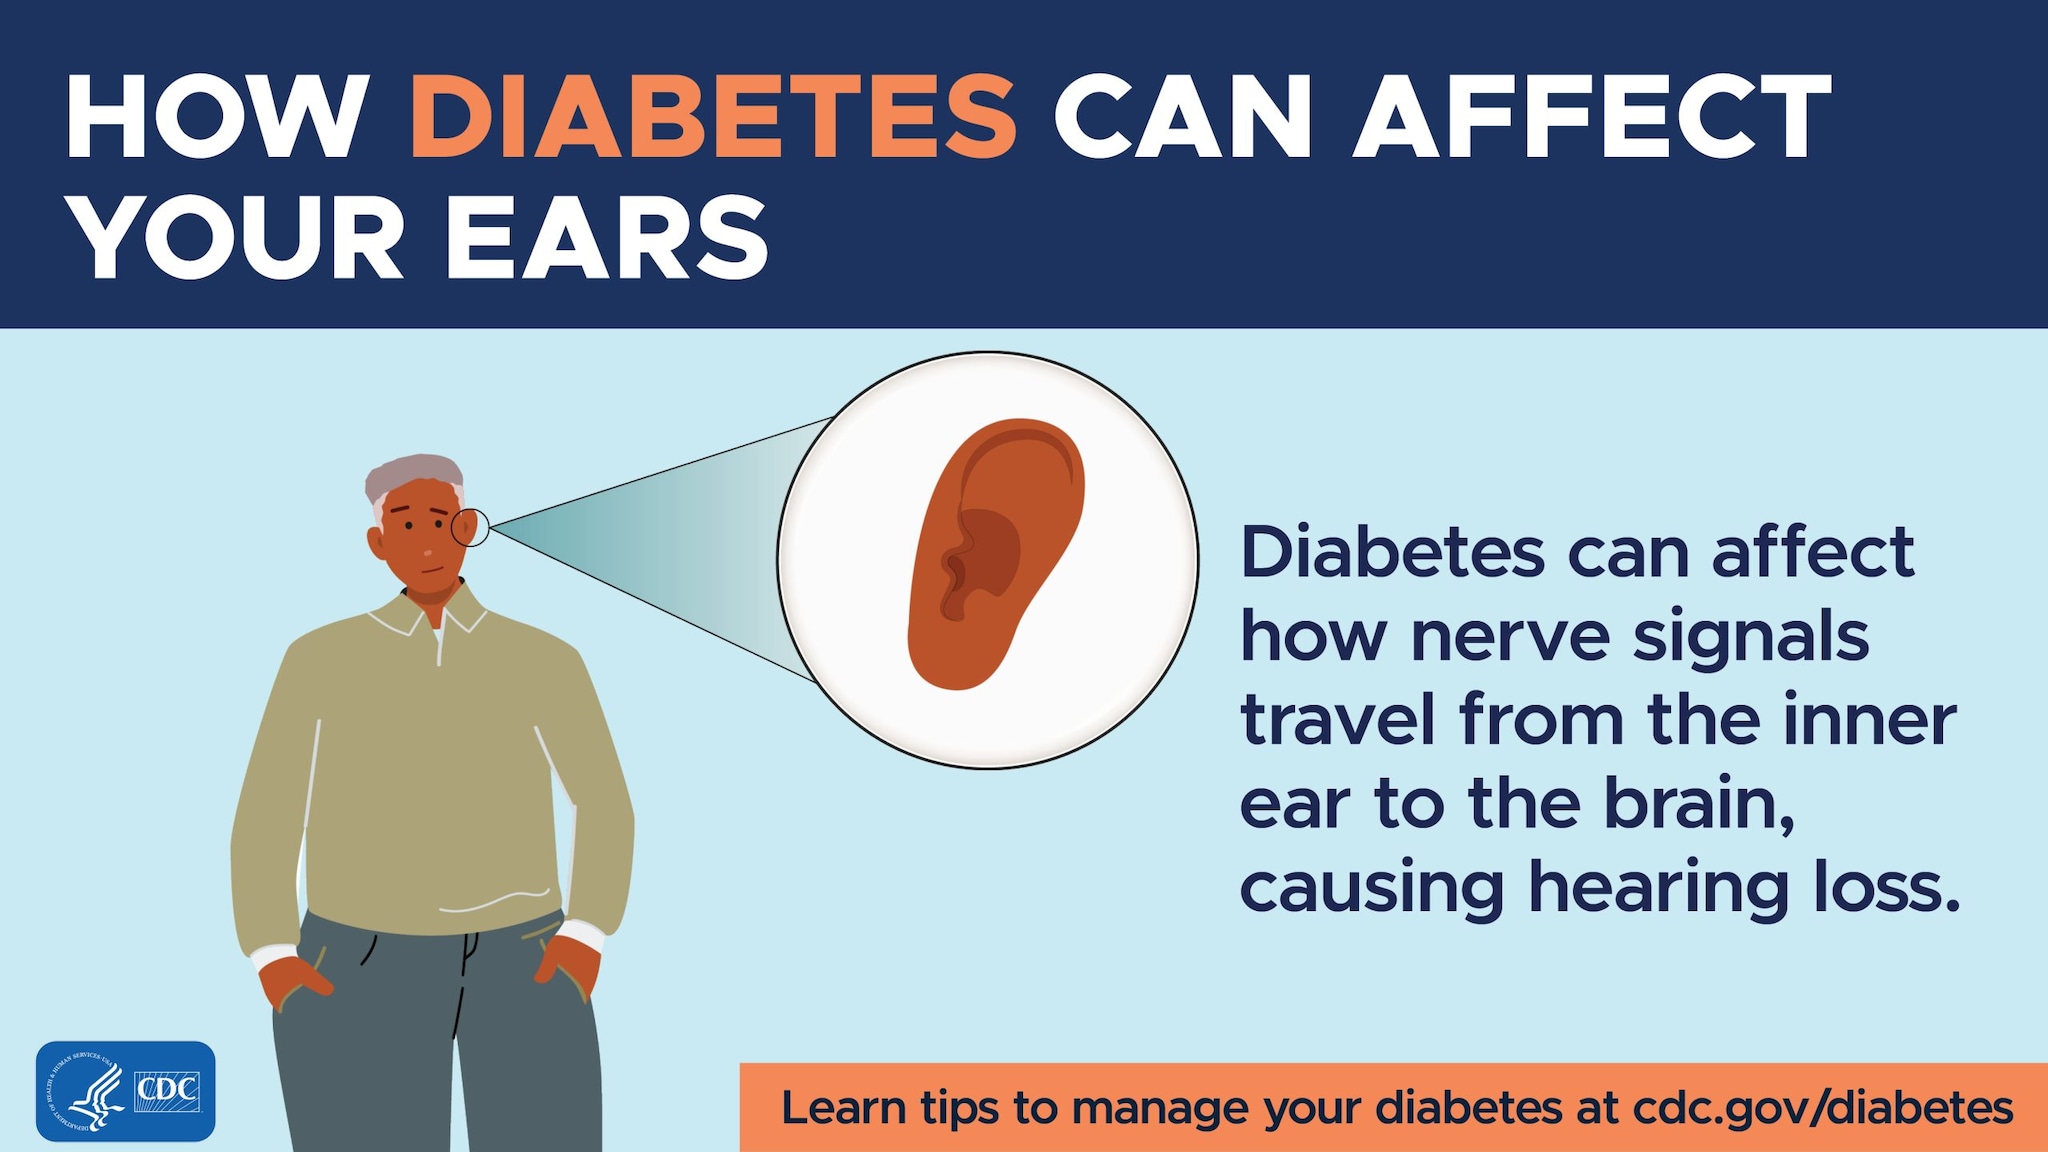 Diabetes can affect how nerve signals travel from the inner ear to the brain, causing hearing loss.